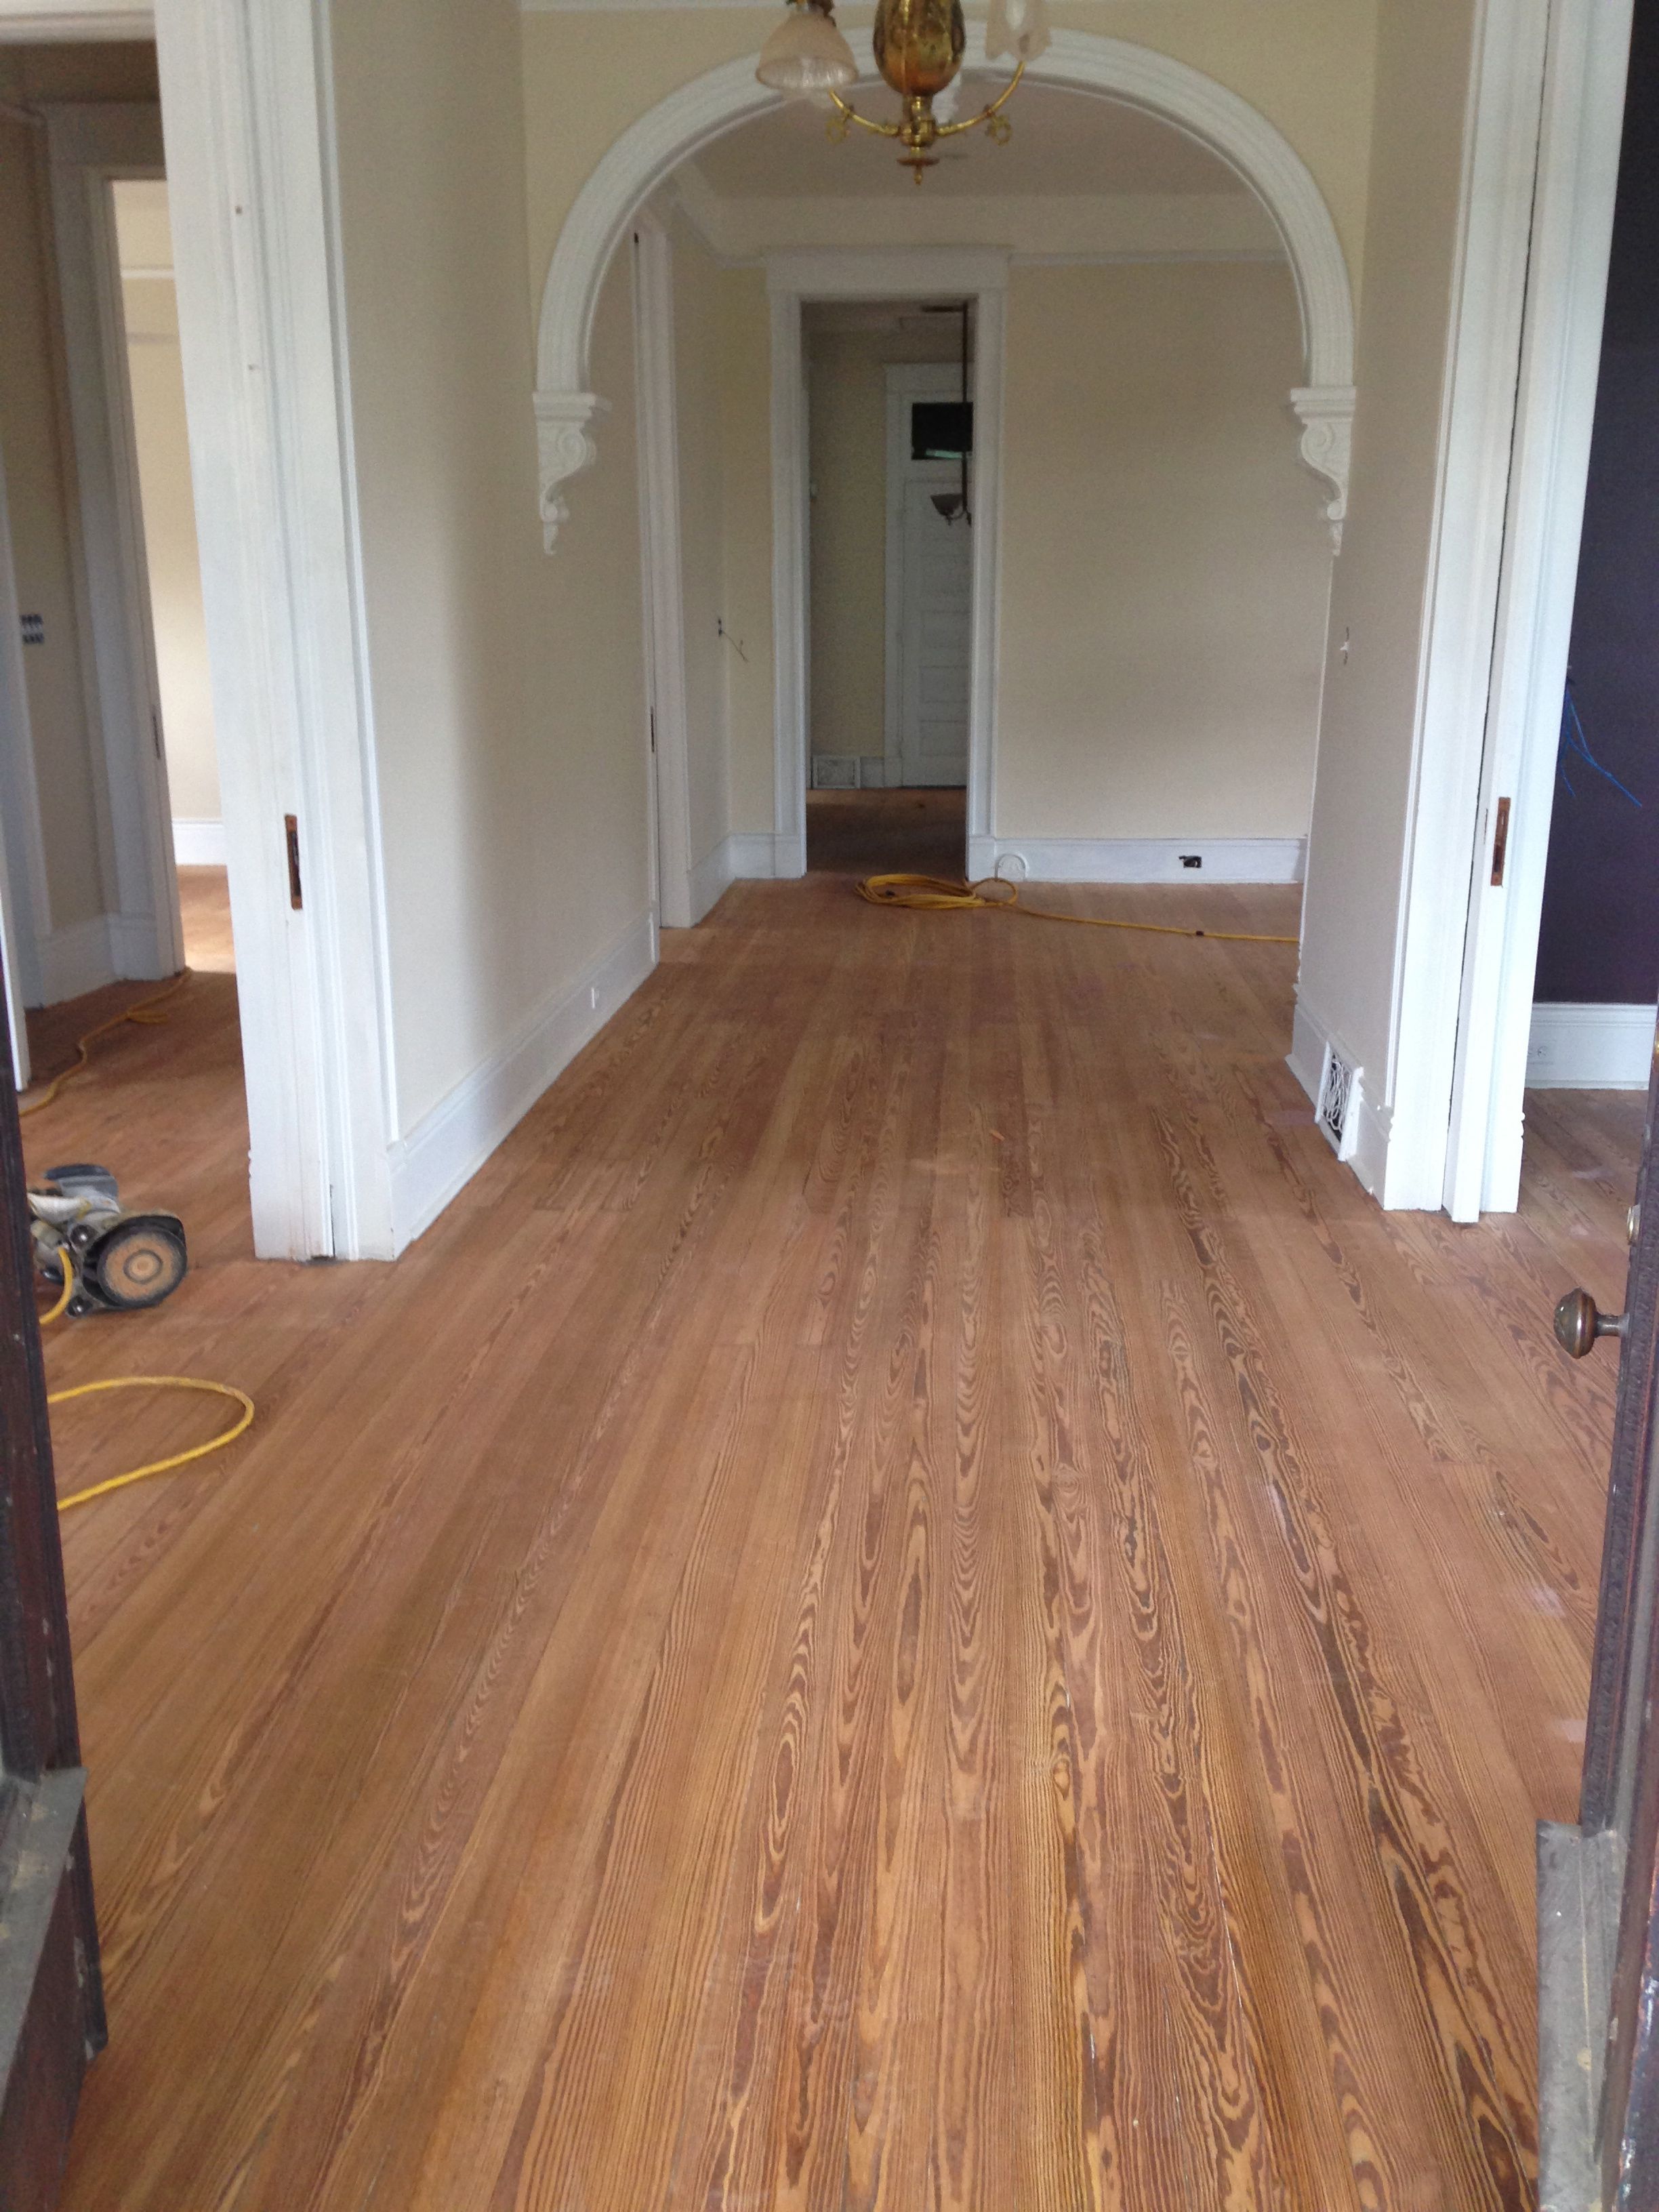 Sanded and cleaned hardwood floors.